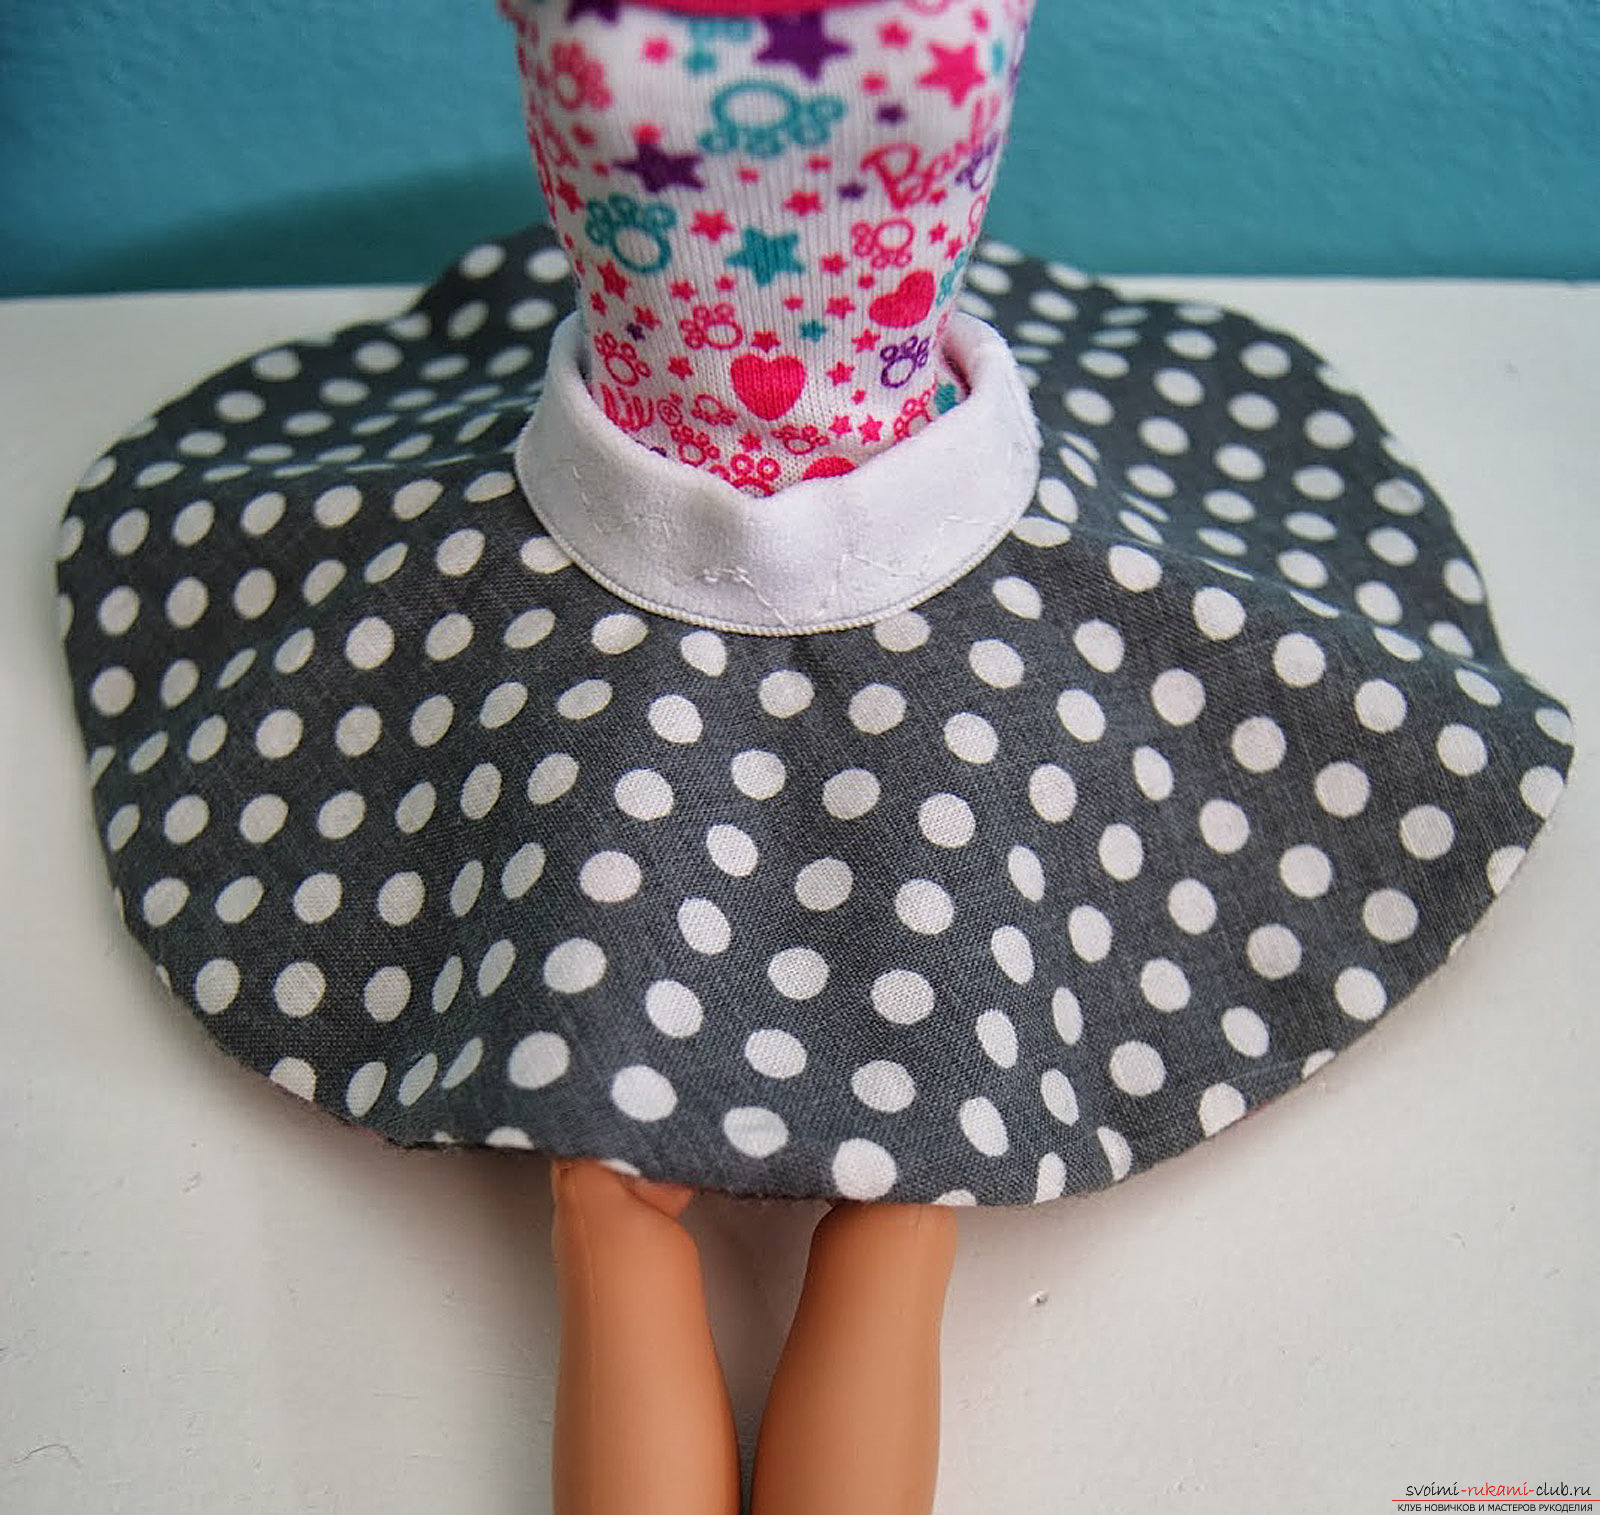 Skirt-sol for Barbie, which can be turned out - and there will be another pattern. How is a skirt turned for a doll? Photo №1